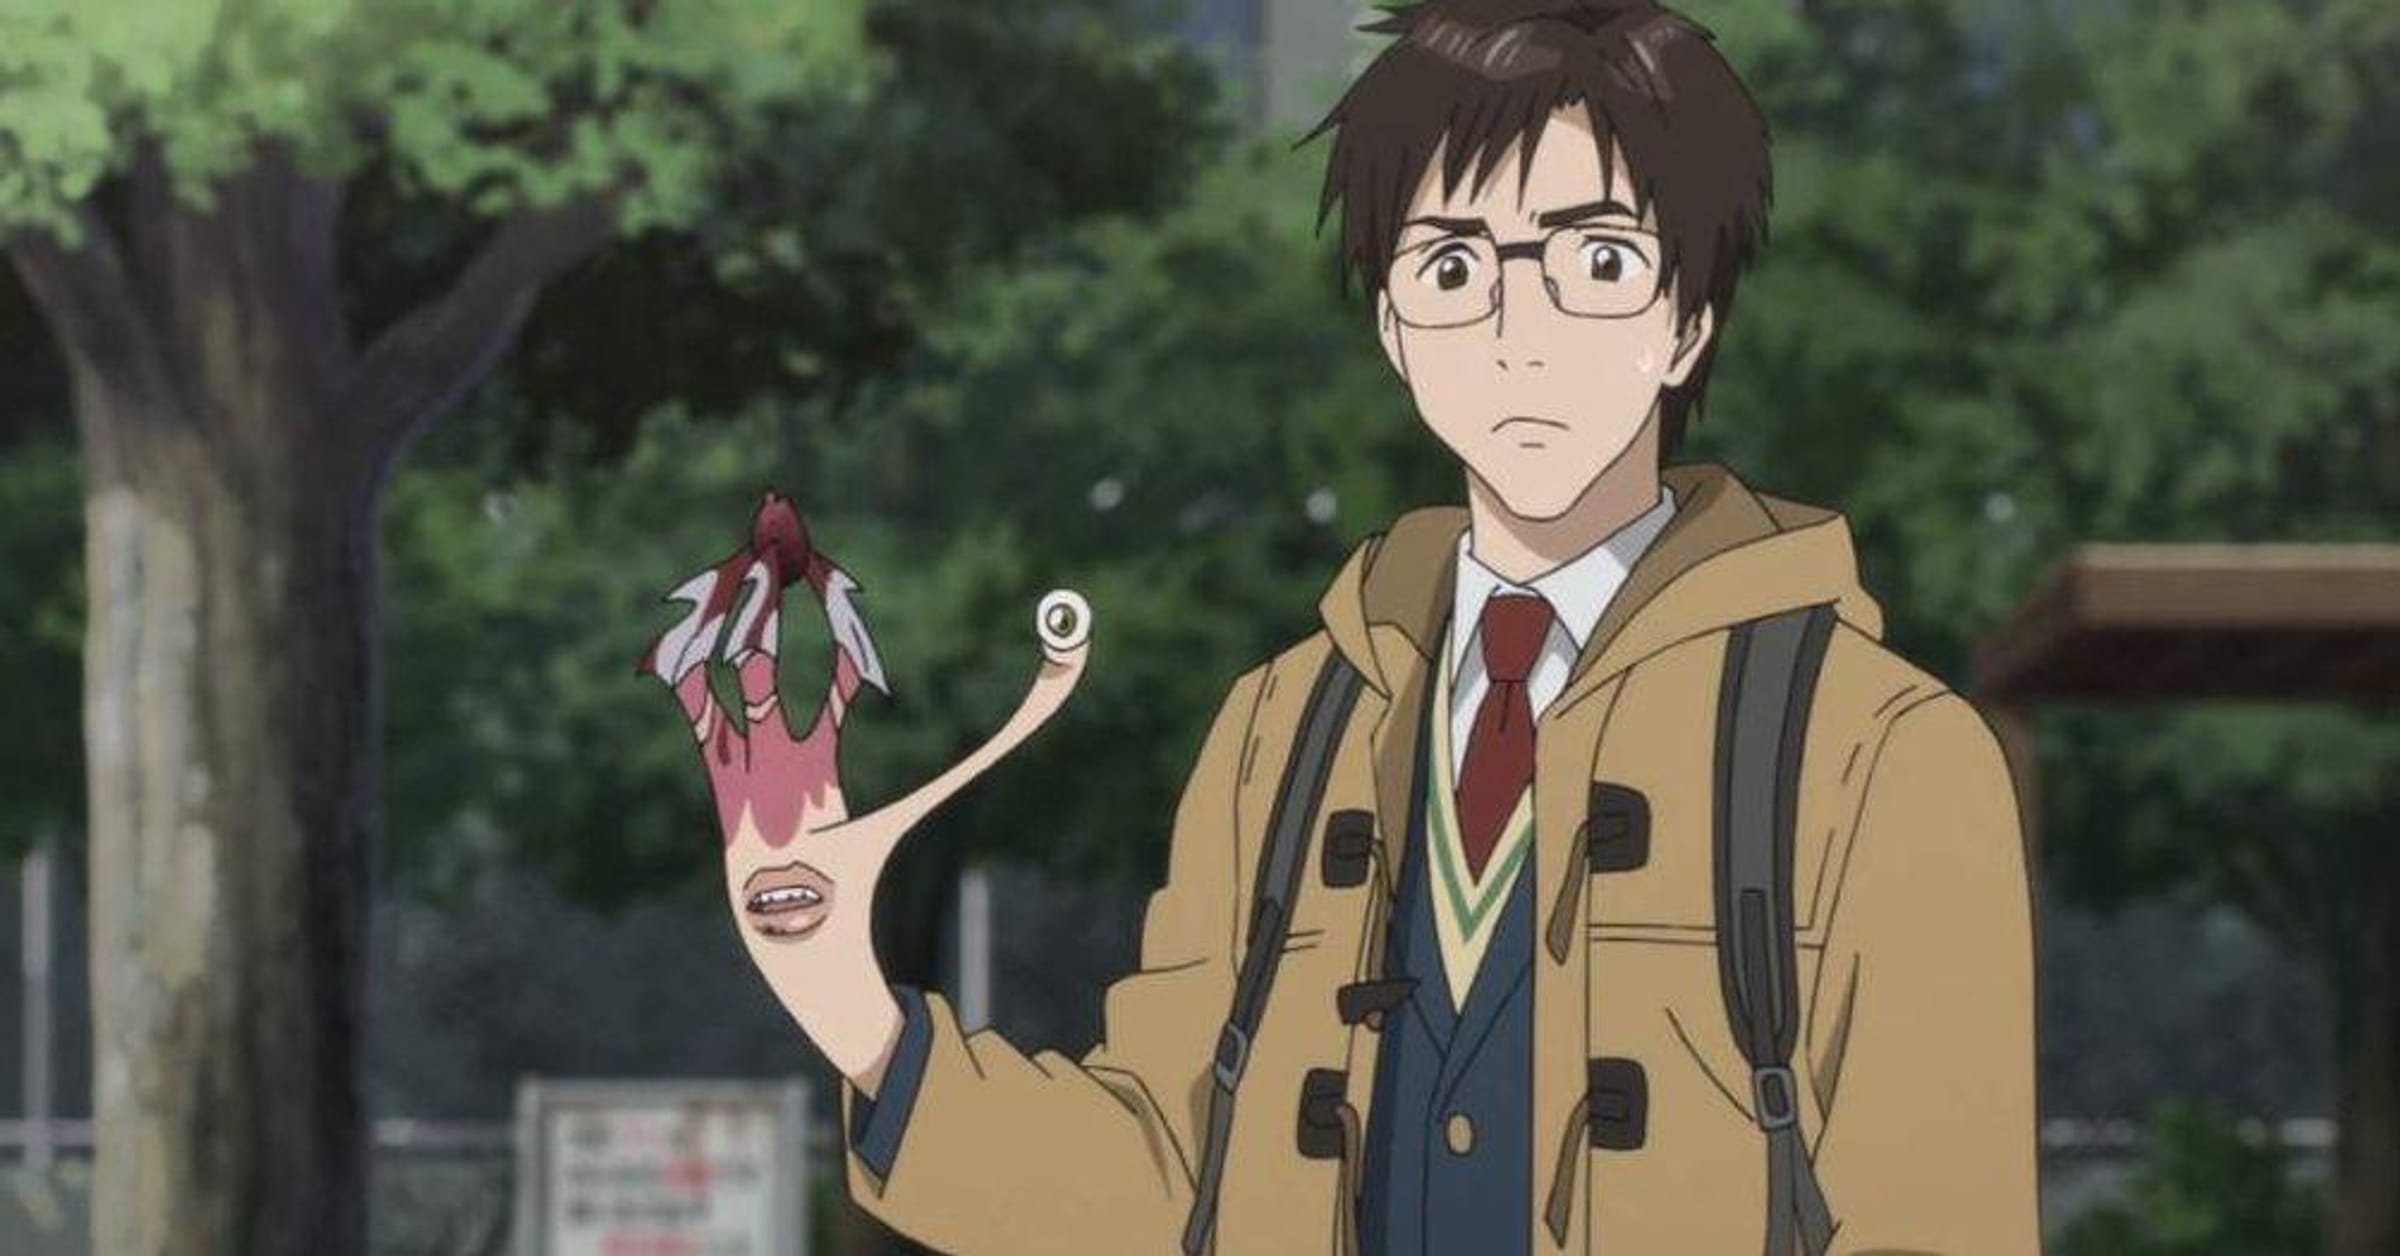 What are some anime that are similar to Parasyte? - Quora